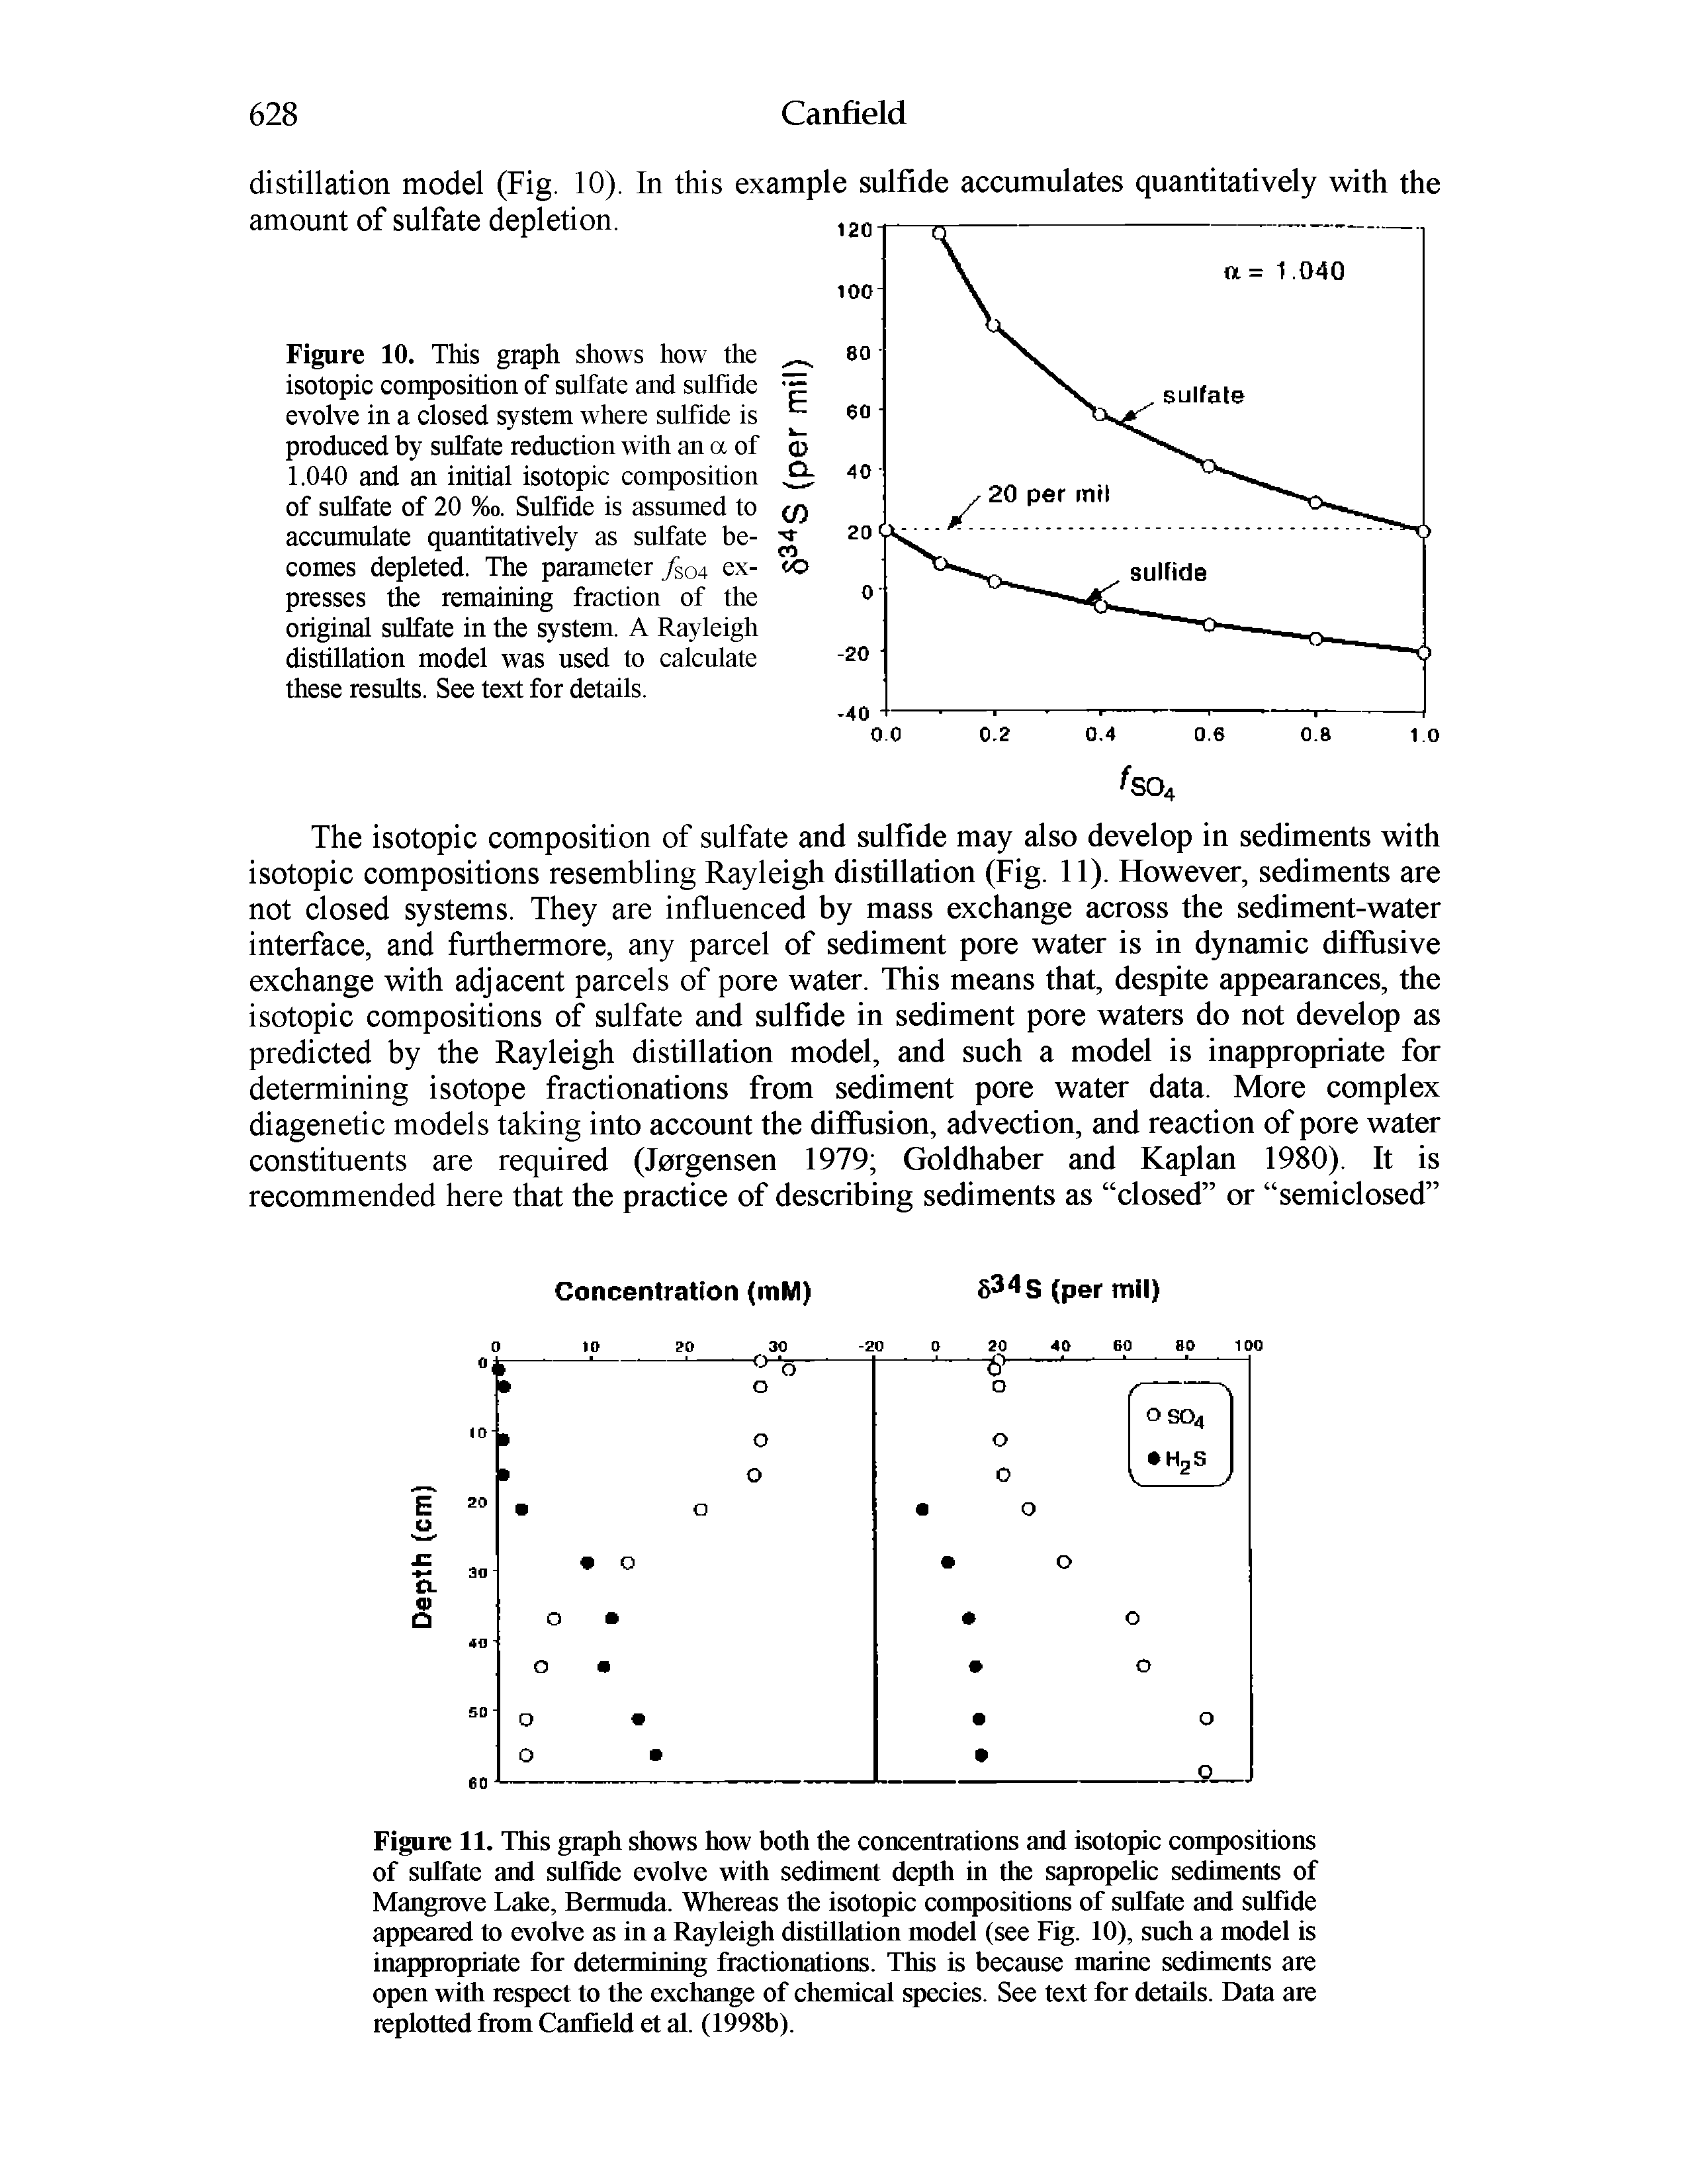 Figure 10. This graph shows how the isotopic composition of sulfate and sulfide evolve in a closed system where sulfide is produced by sulfate reduction with an a of 1.040 and an initial isotopic composition of sulfate of 20 %o. Sulfide is assumed to accumulate quantitatively as sulfate becomes depleted. The parameter /so4 expresses the remaining fraction of the original sulfate in the system. A Rayleigh distillation model was used to calculate these results. See text for details.